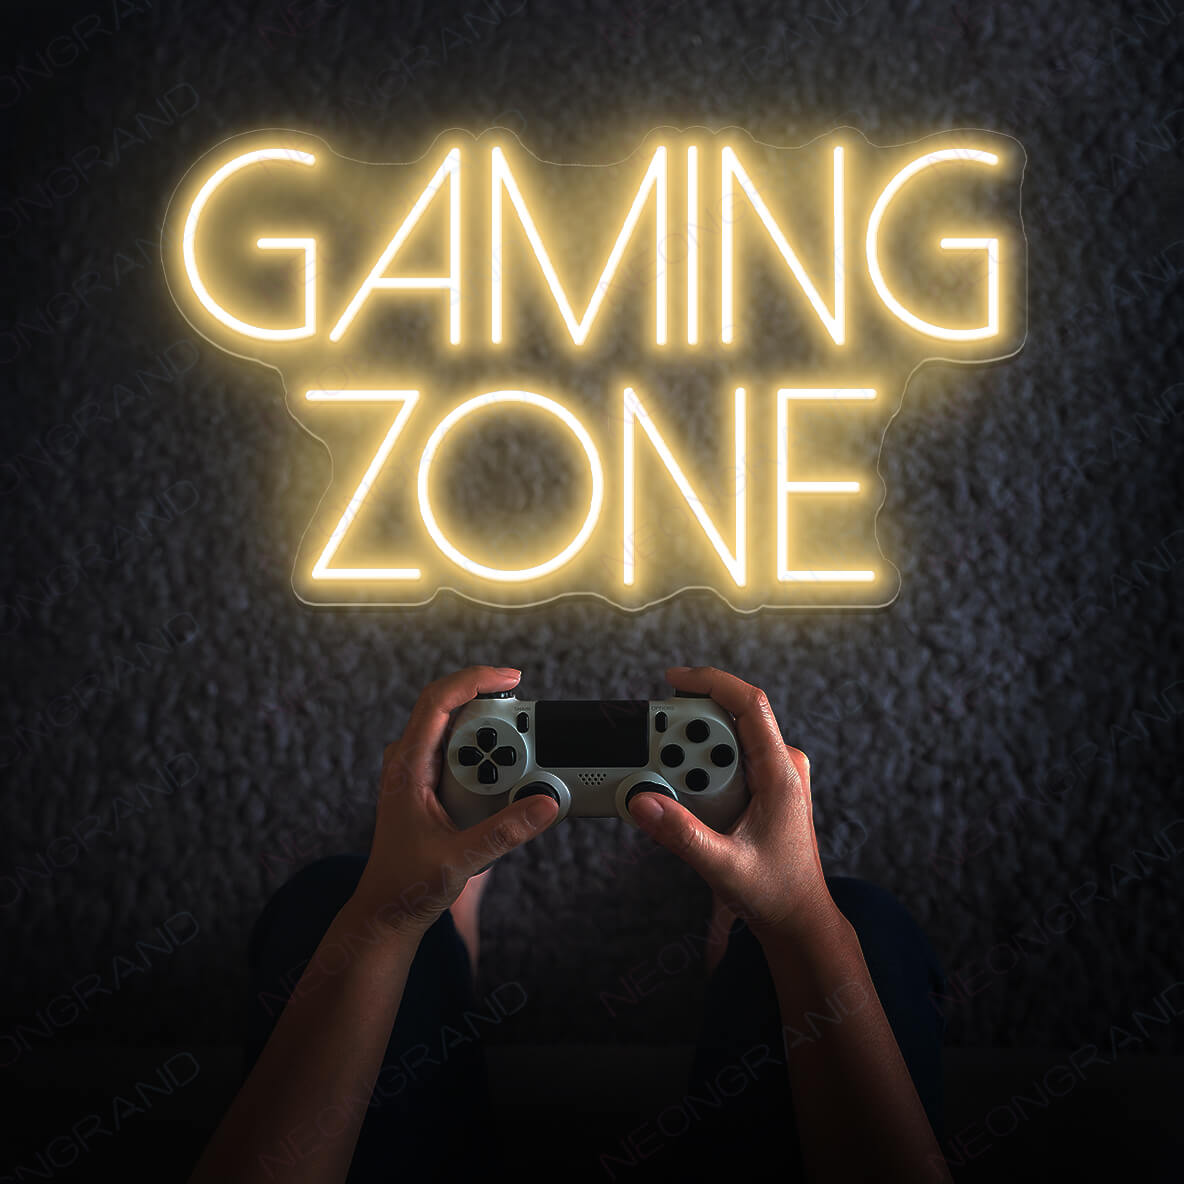 Gaming Zone Neon Sign Game Room Led Light light yellow